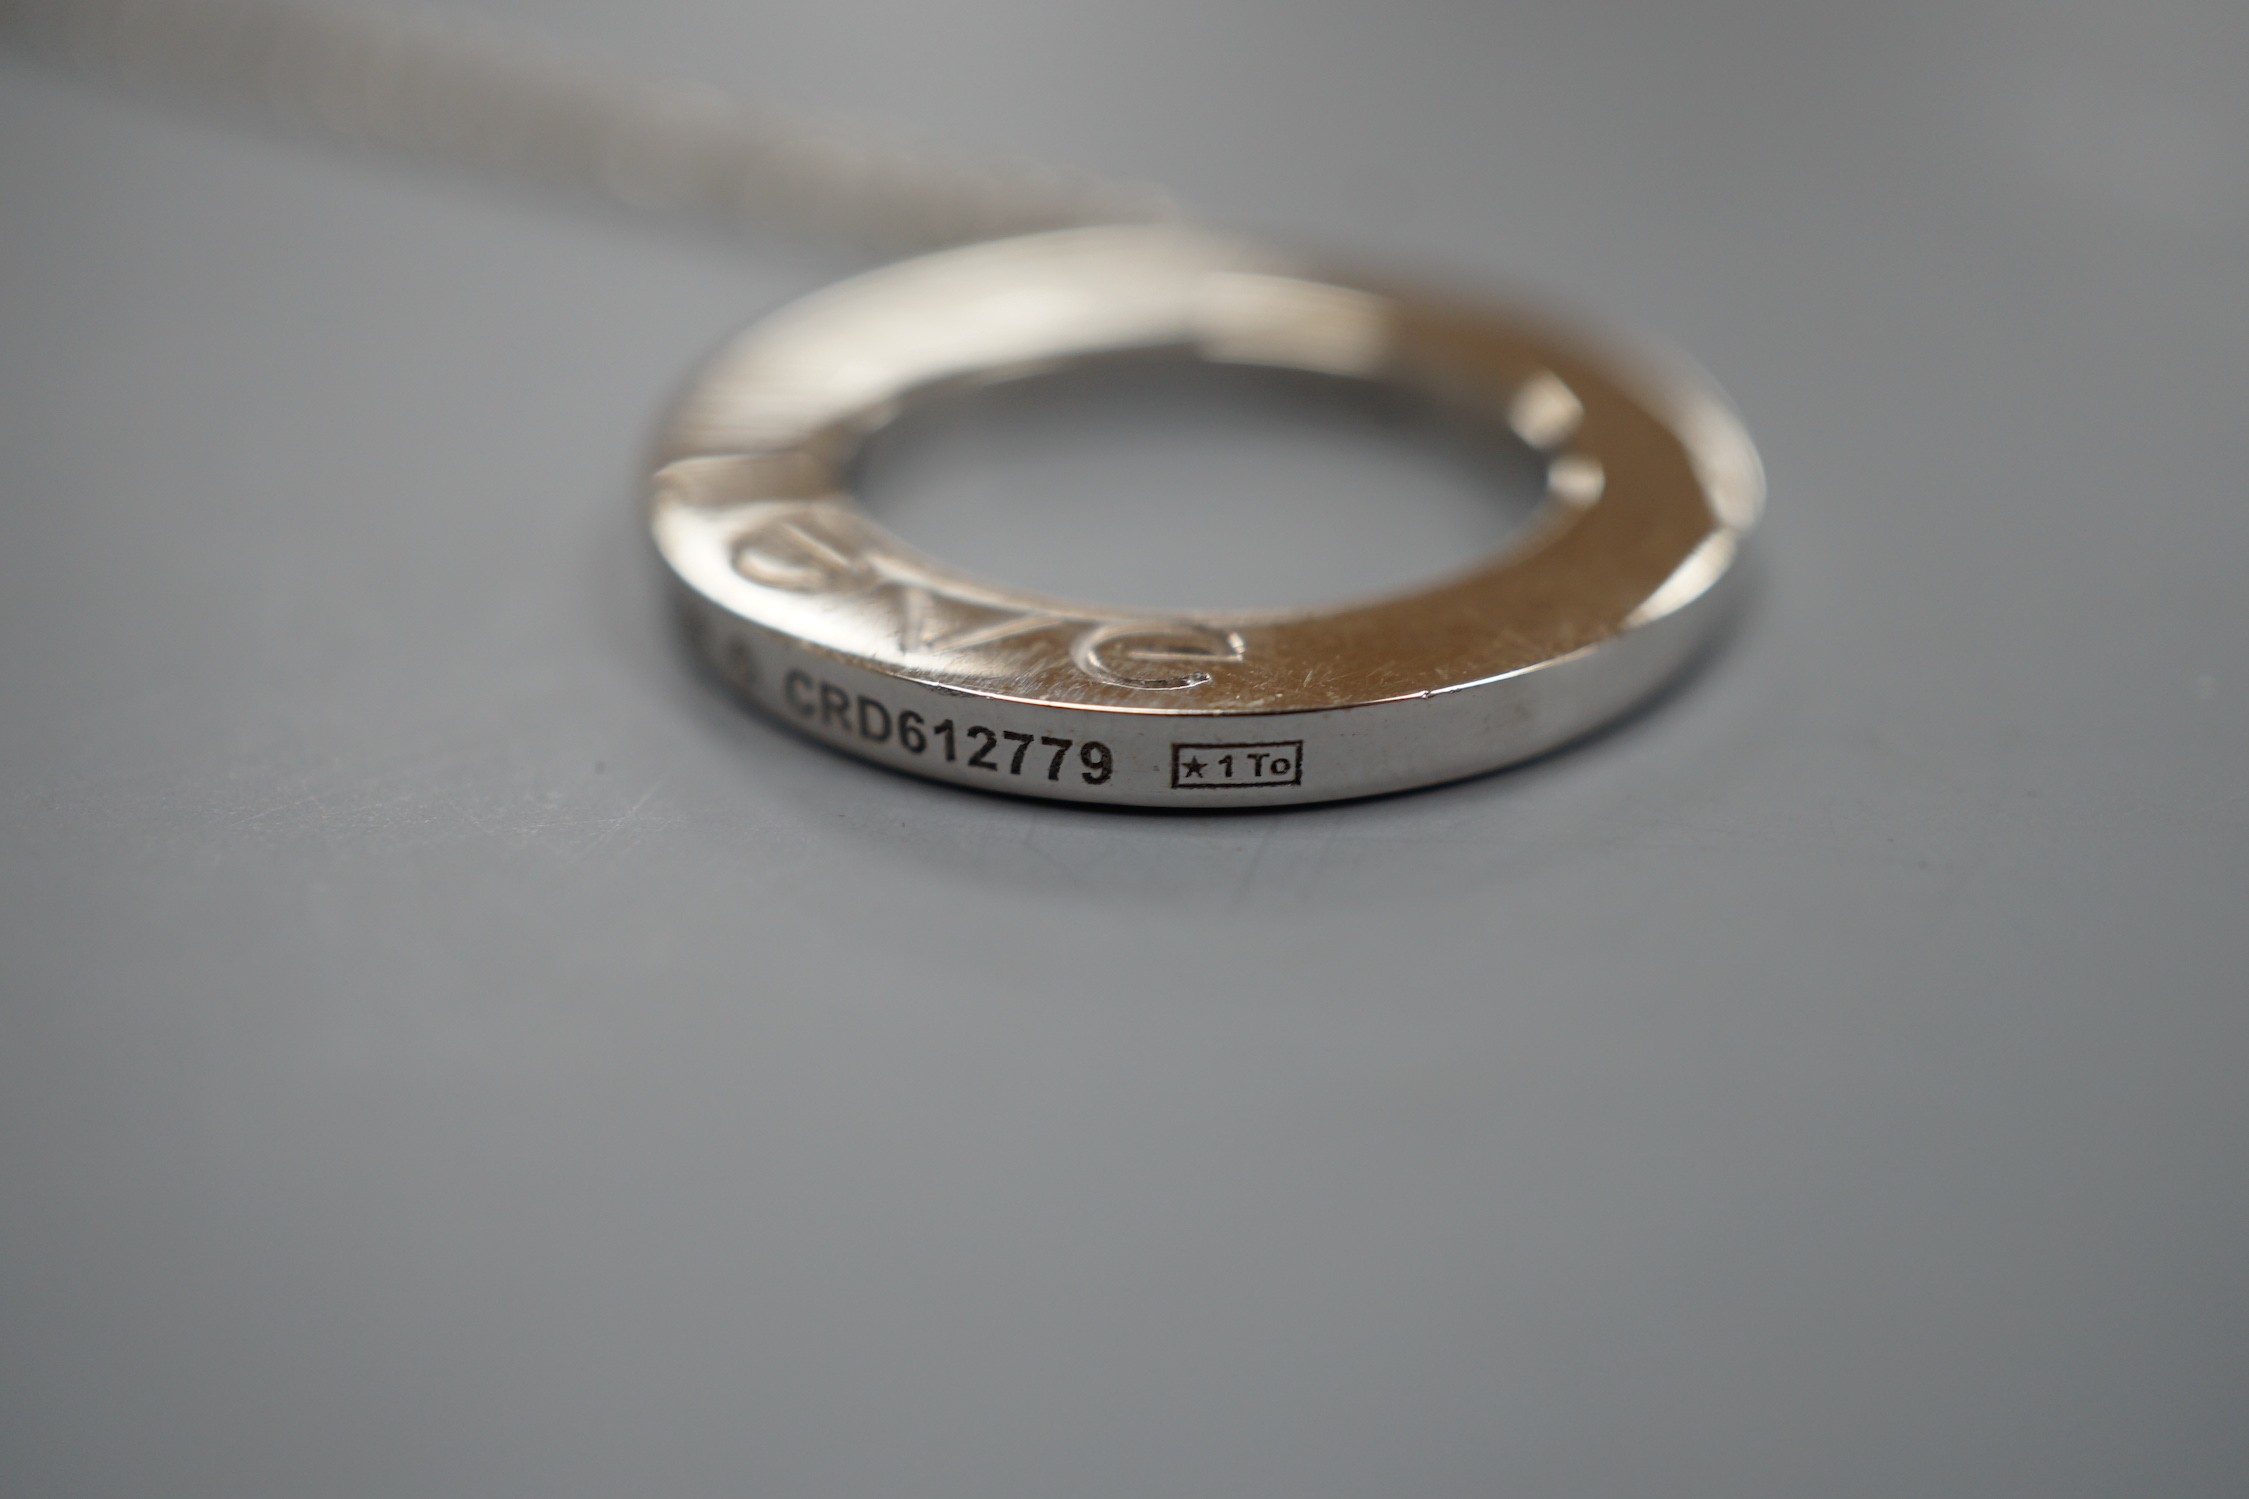 A modern Italian Cartier 750 white metal 'Love' circular pendant, 24mm, numbered CRD612779, on a 750 white metal fine link chain, 46cm, 10.8 grams.